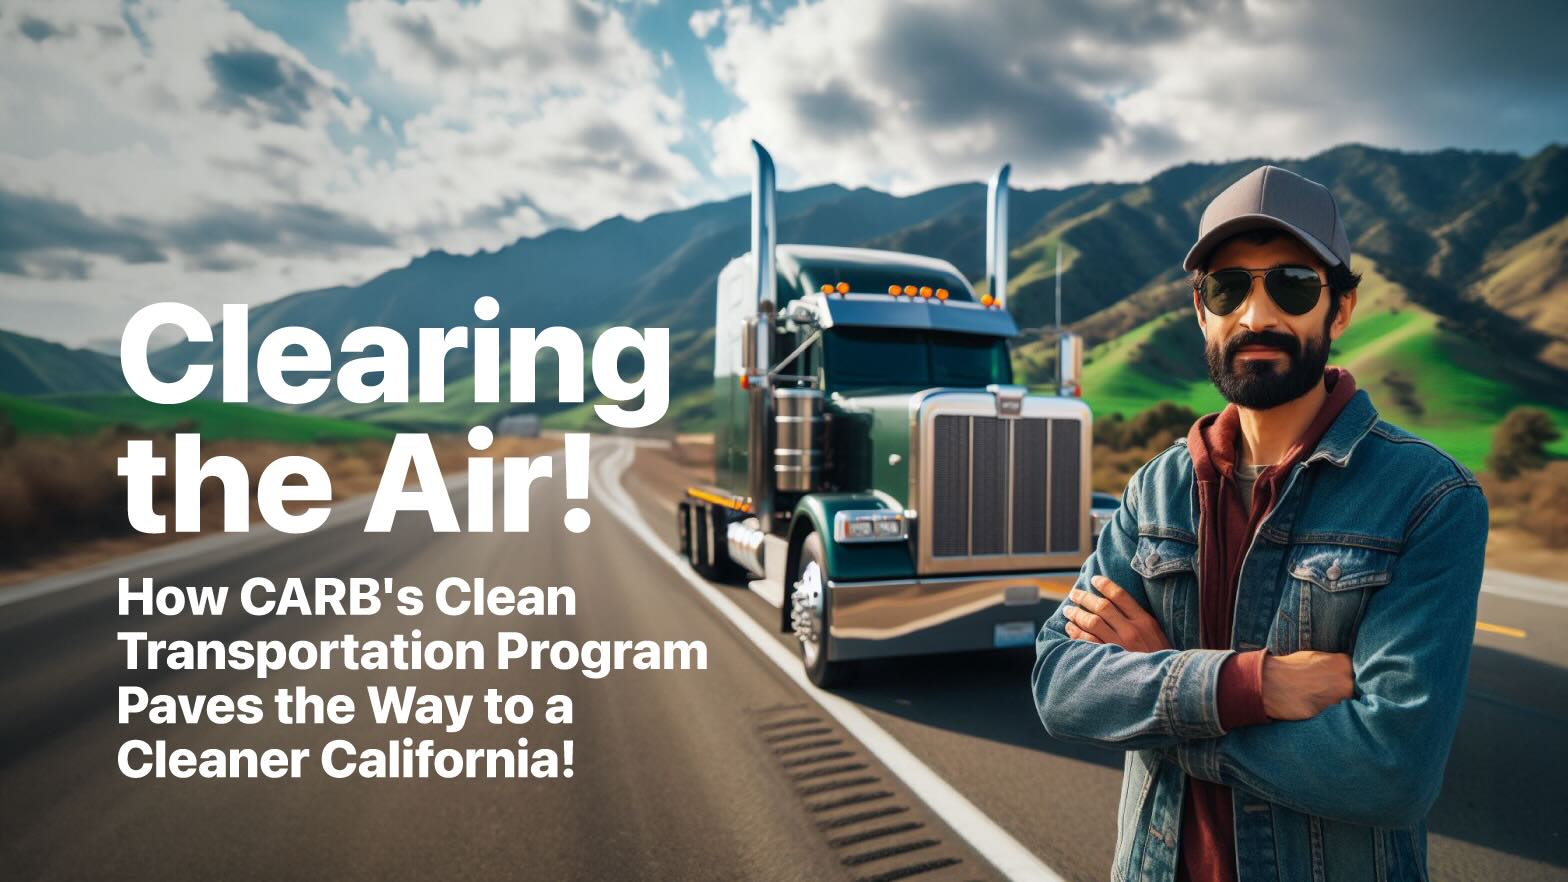 CARB's Clean Transportation Program Paves the Way to a Cleaner California